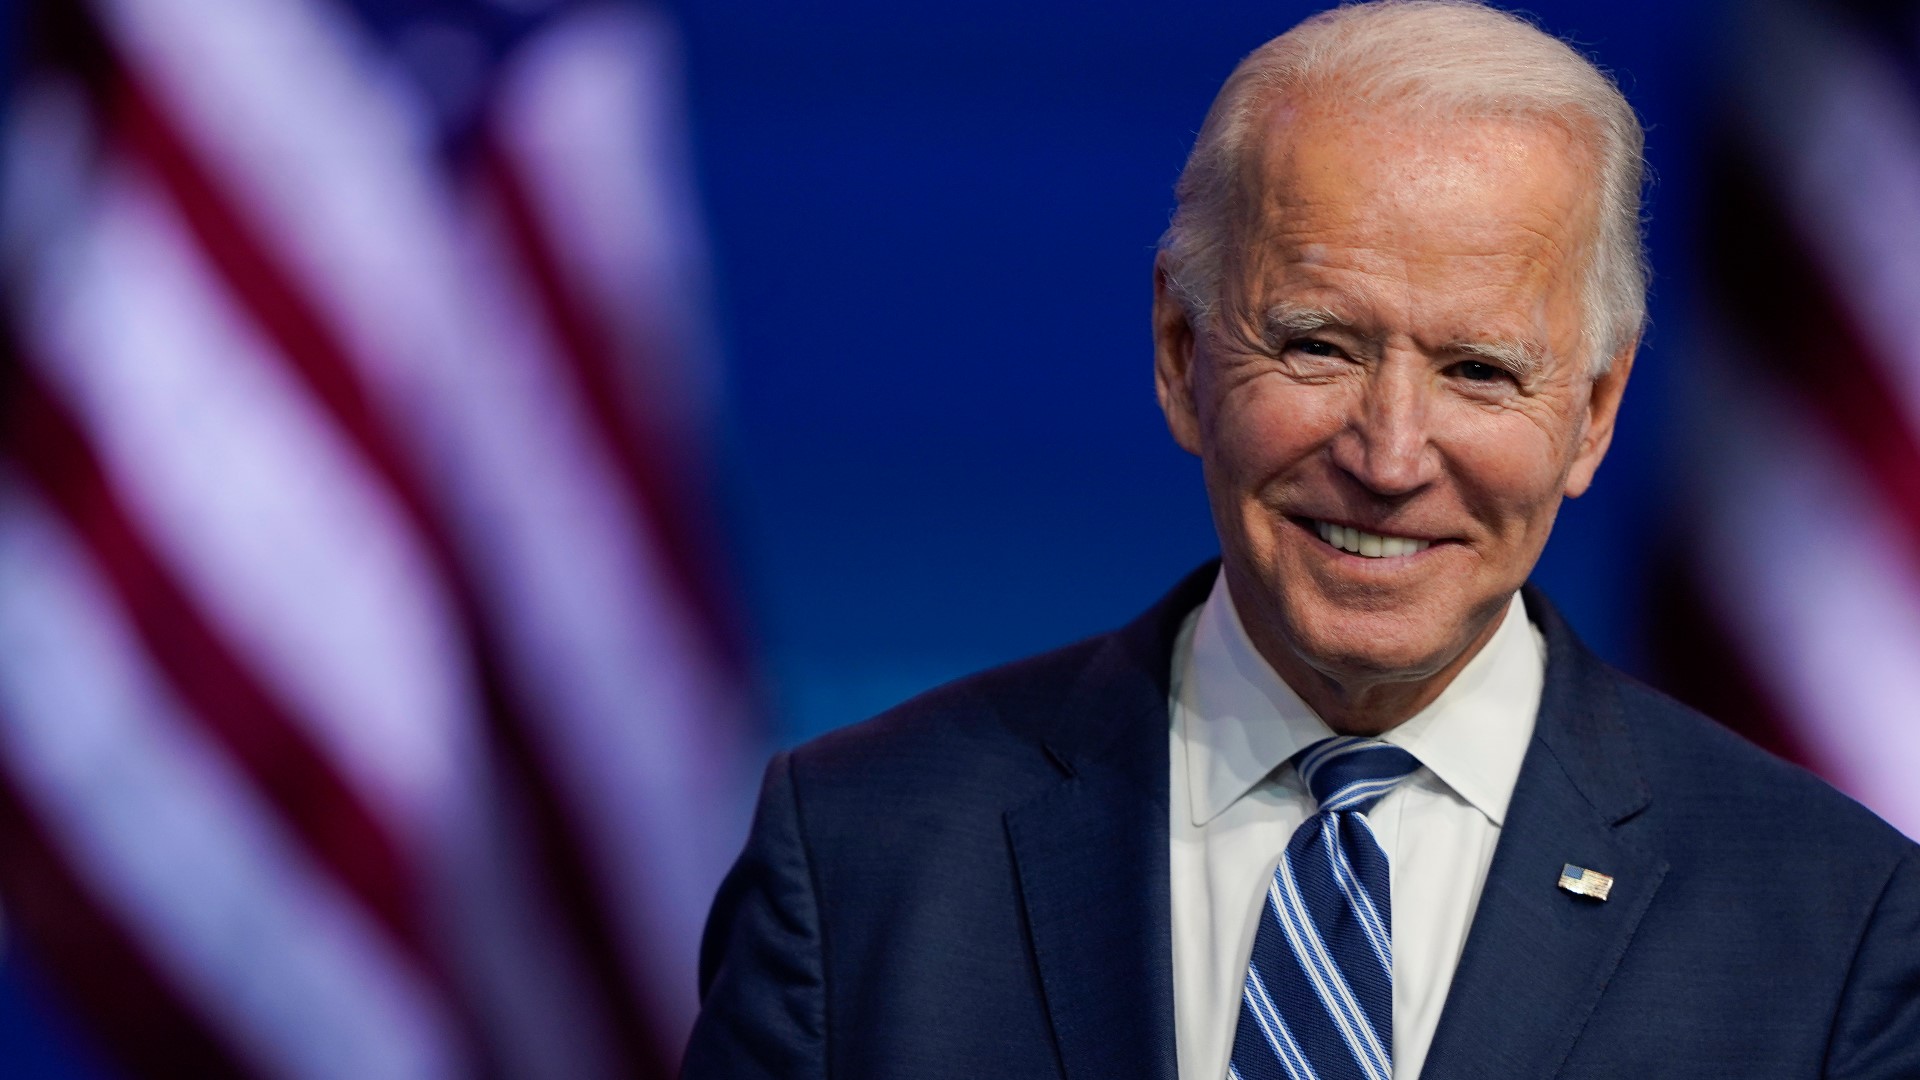 The move by the General Services Administration clears the way for aides of President-elect Joe Biden to begin coordinating with federal agencies.